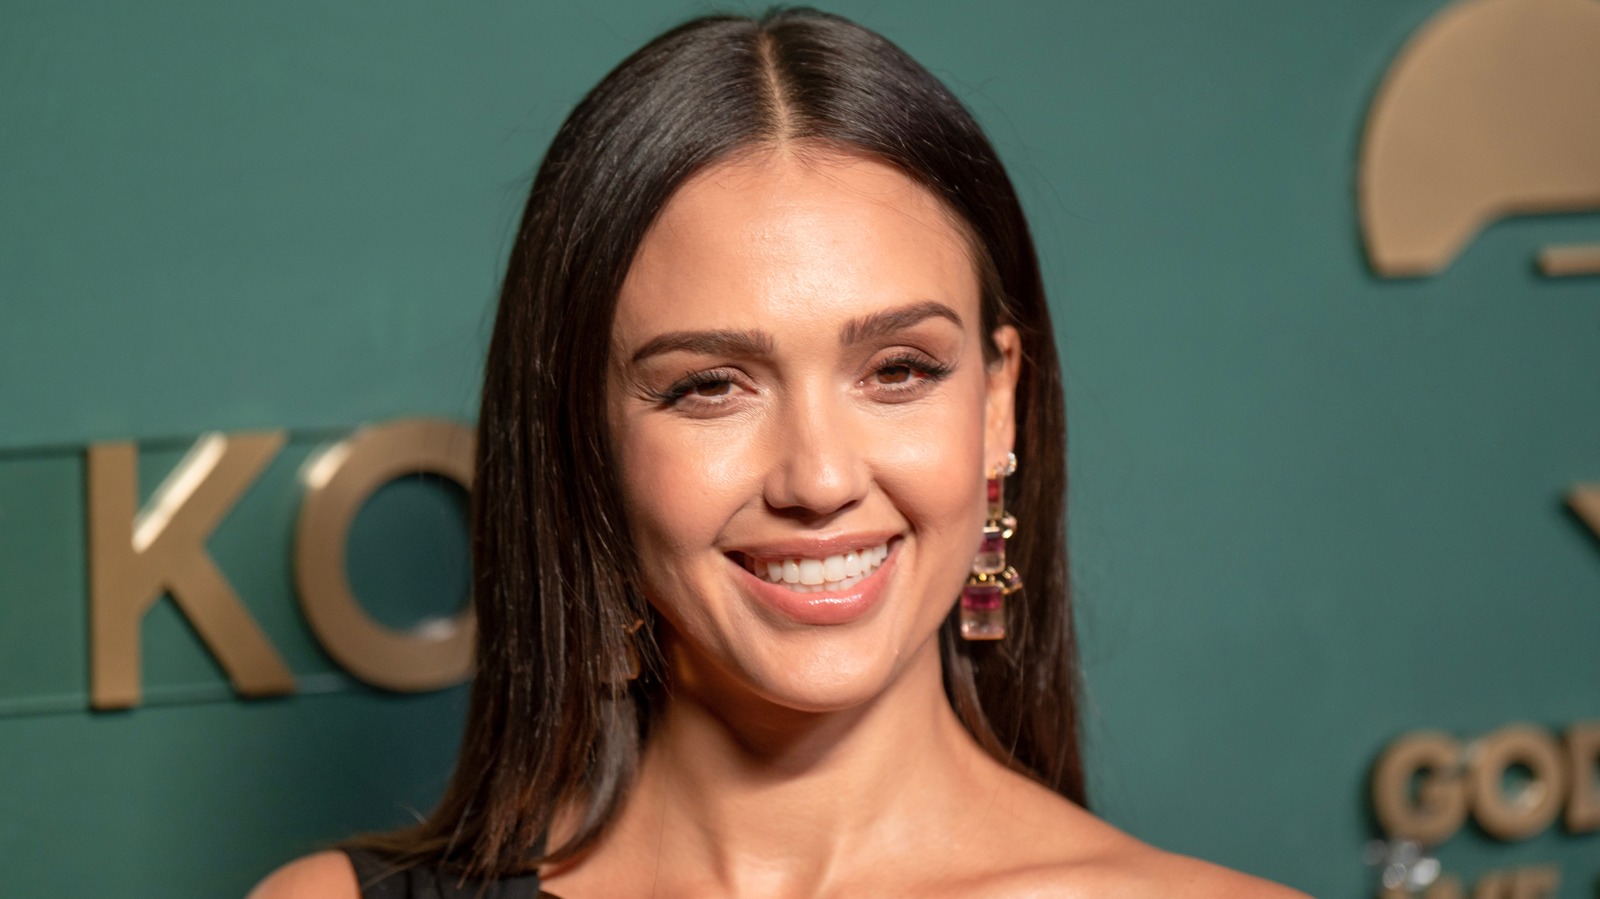 Jessica Alba Explains The Best Way To Hang String Lights For An ‘Adult’ Patio Space – House Digest